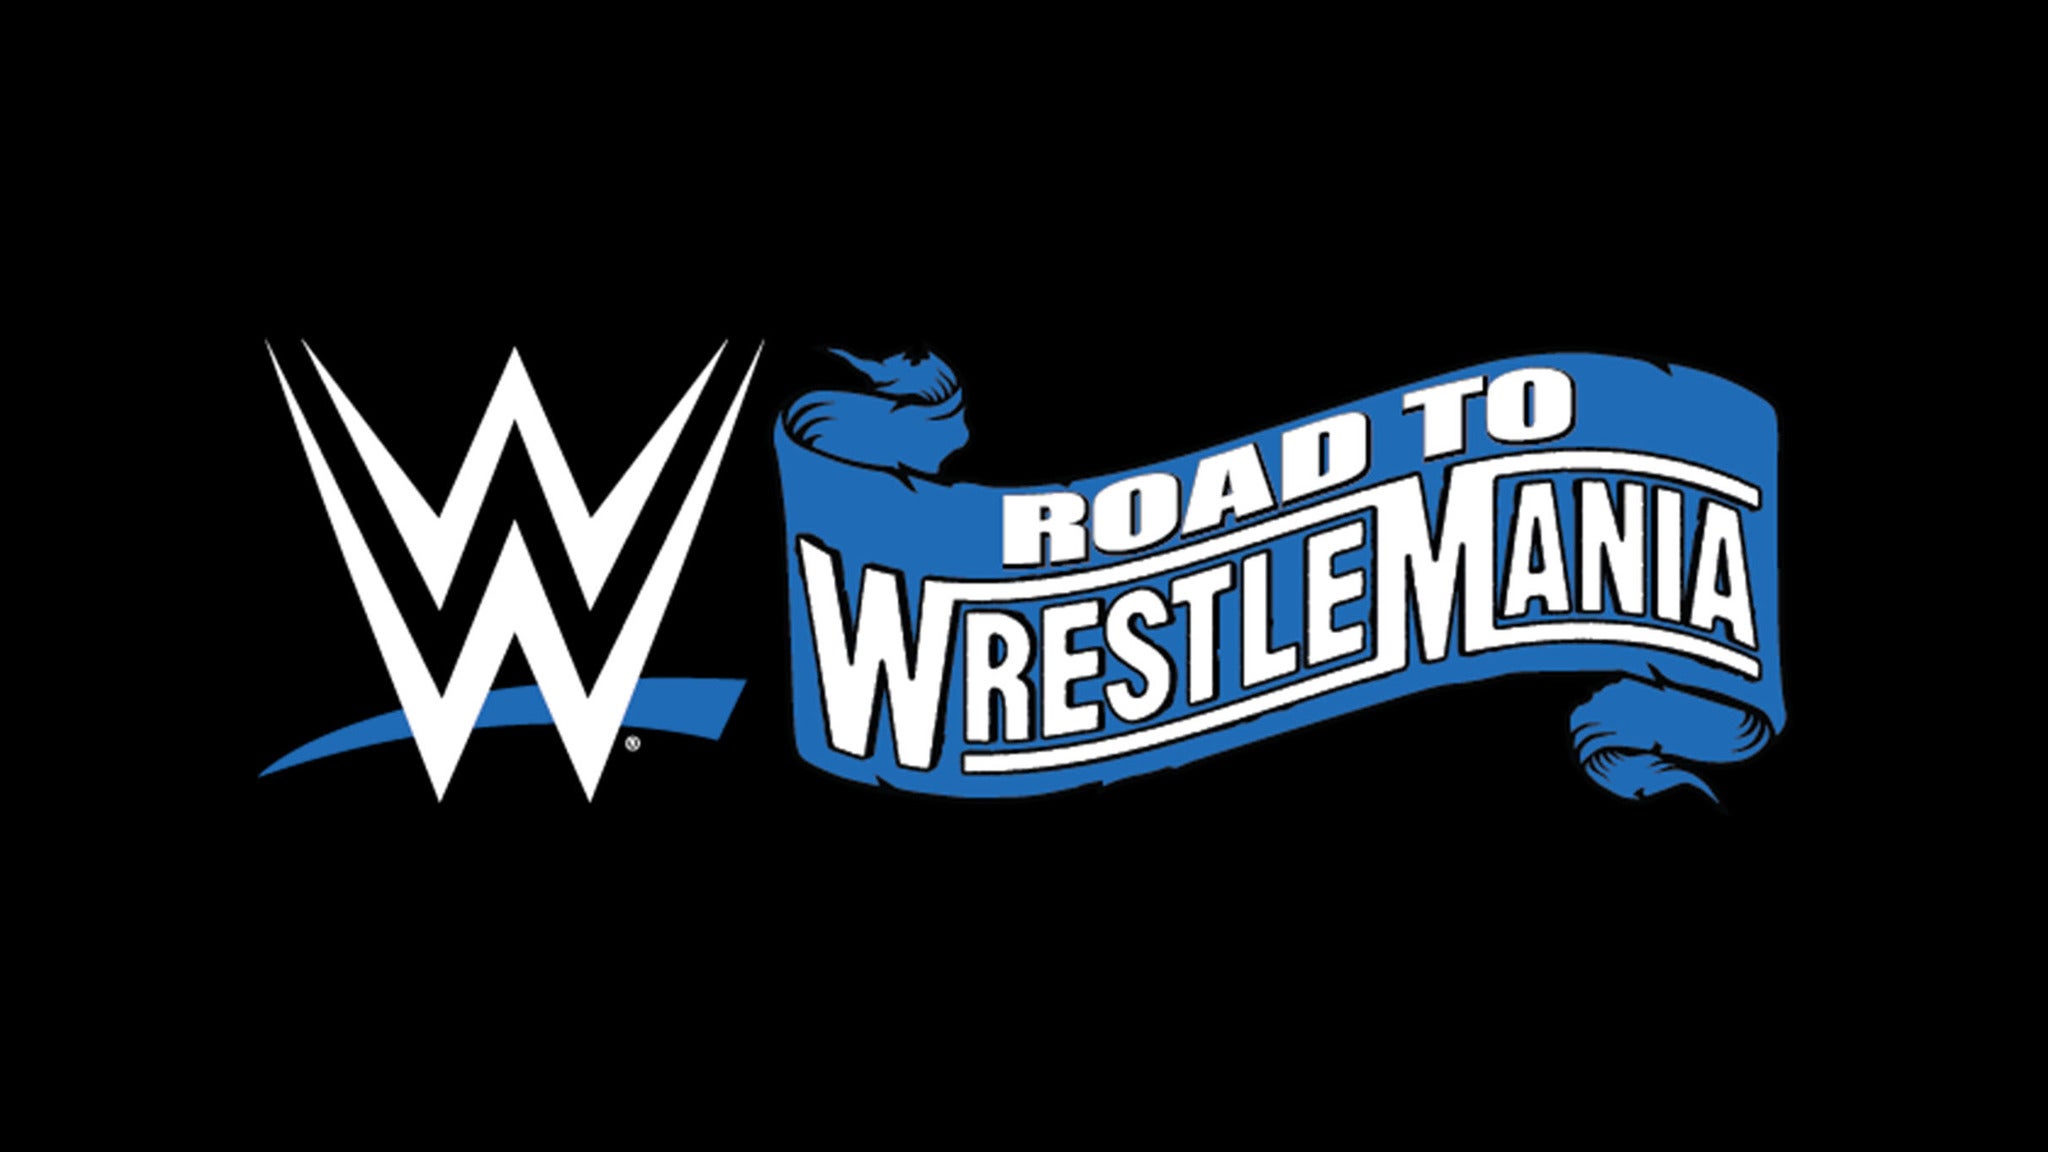 WWE Road to WrestleMania Tickets Single Game Tickets & Schedule